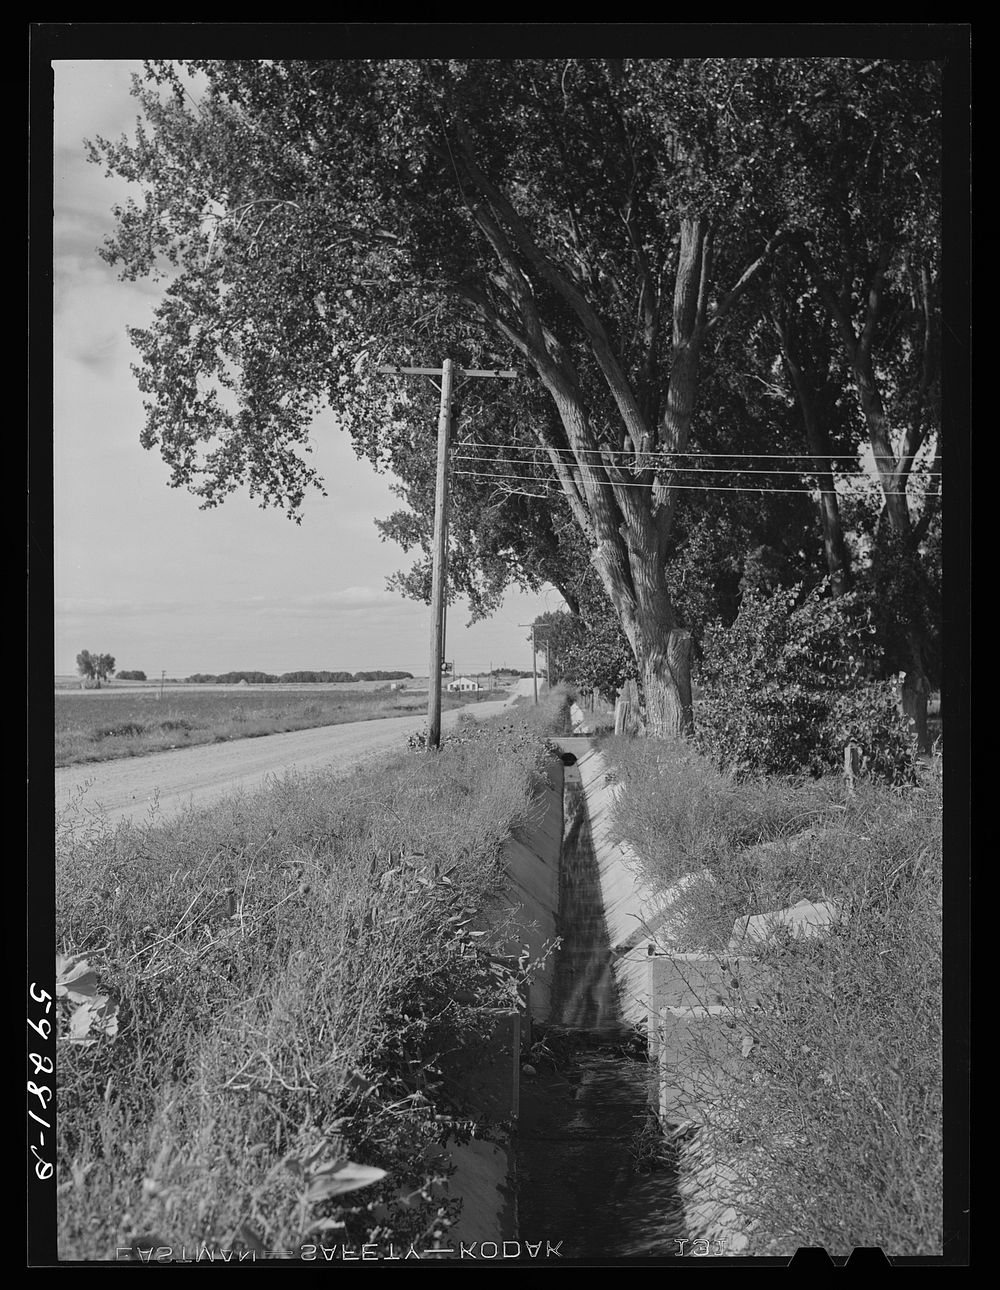 [Untitled photo, possibly related to: Irrigation ditch on Scottsbluff Farmsteads, FSA (Farm Security Administration)…